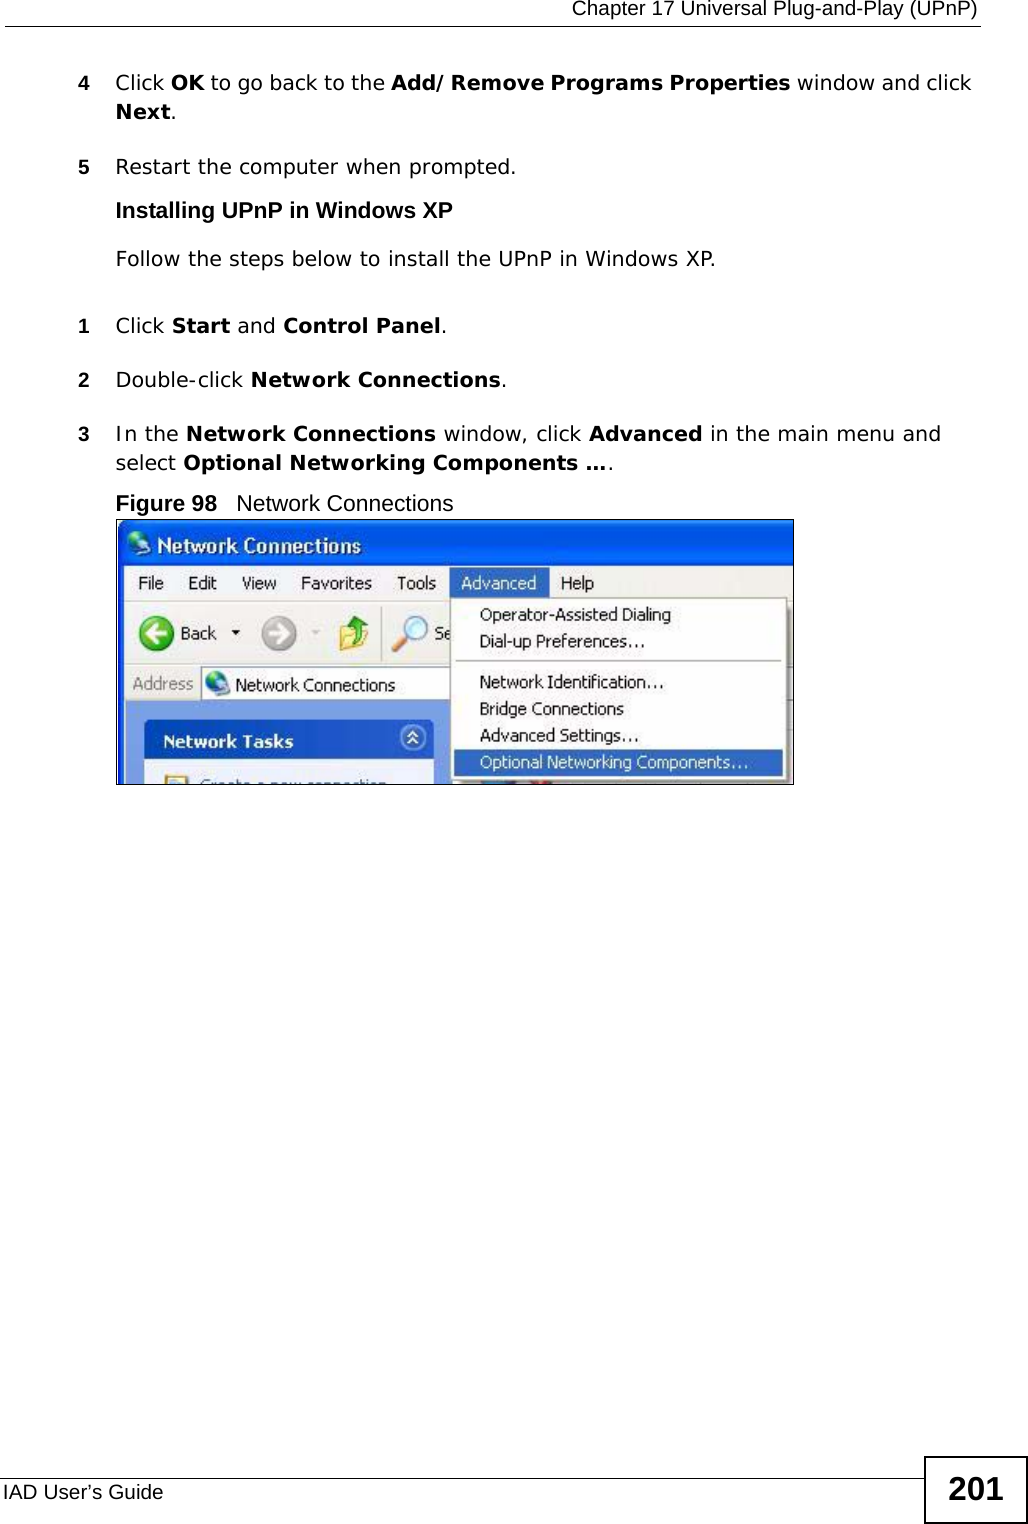  Chapter 17 Universal Plug-and-Play (UPnP)IAD User’s Guide 2014Click OK to go back to the Add/Remove Programs Properties window and click Next.  5Restart the computer when prompted. Installing UPnP in Windows XPFollow the steps below to install the UPnP in Windows XP.1Click Start and Control Panel. 2Double-click Network Connections.3In the Network Connections window, click Advanced in the main menu and select Optional Networking Components ….  Figure 98   Network Connections